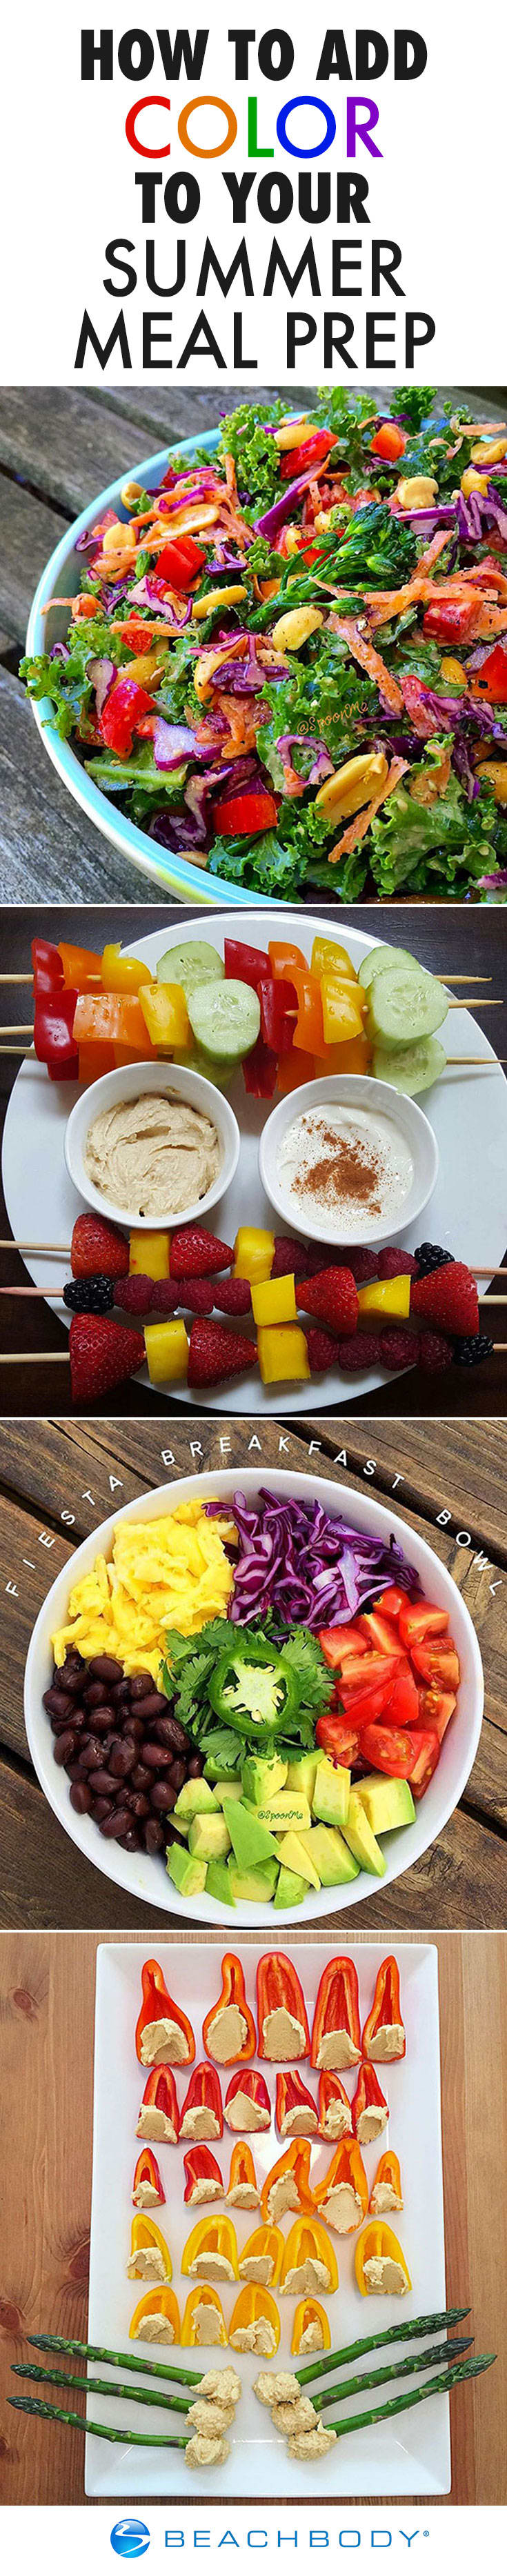 How to Add Color to Your Summer Meal Prep